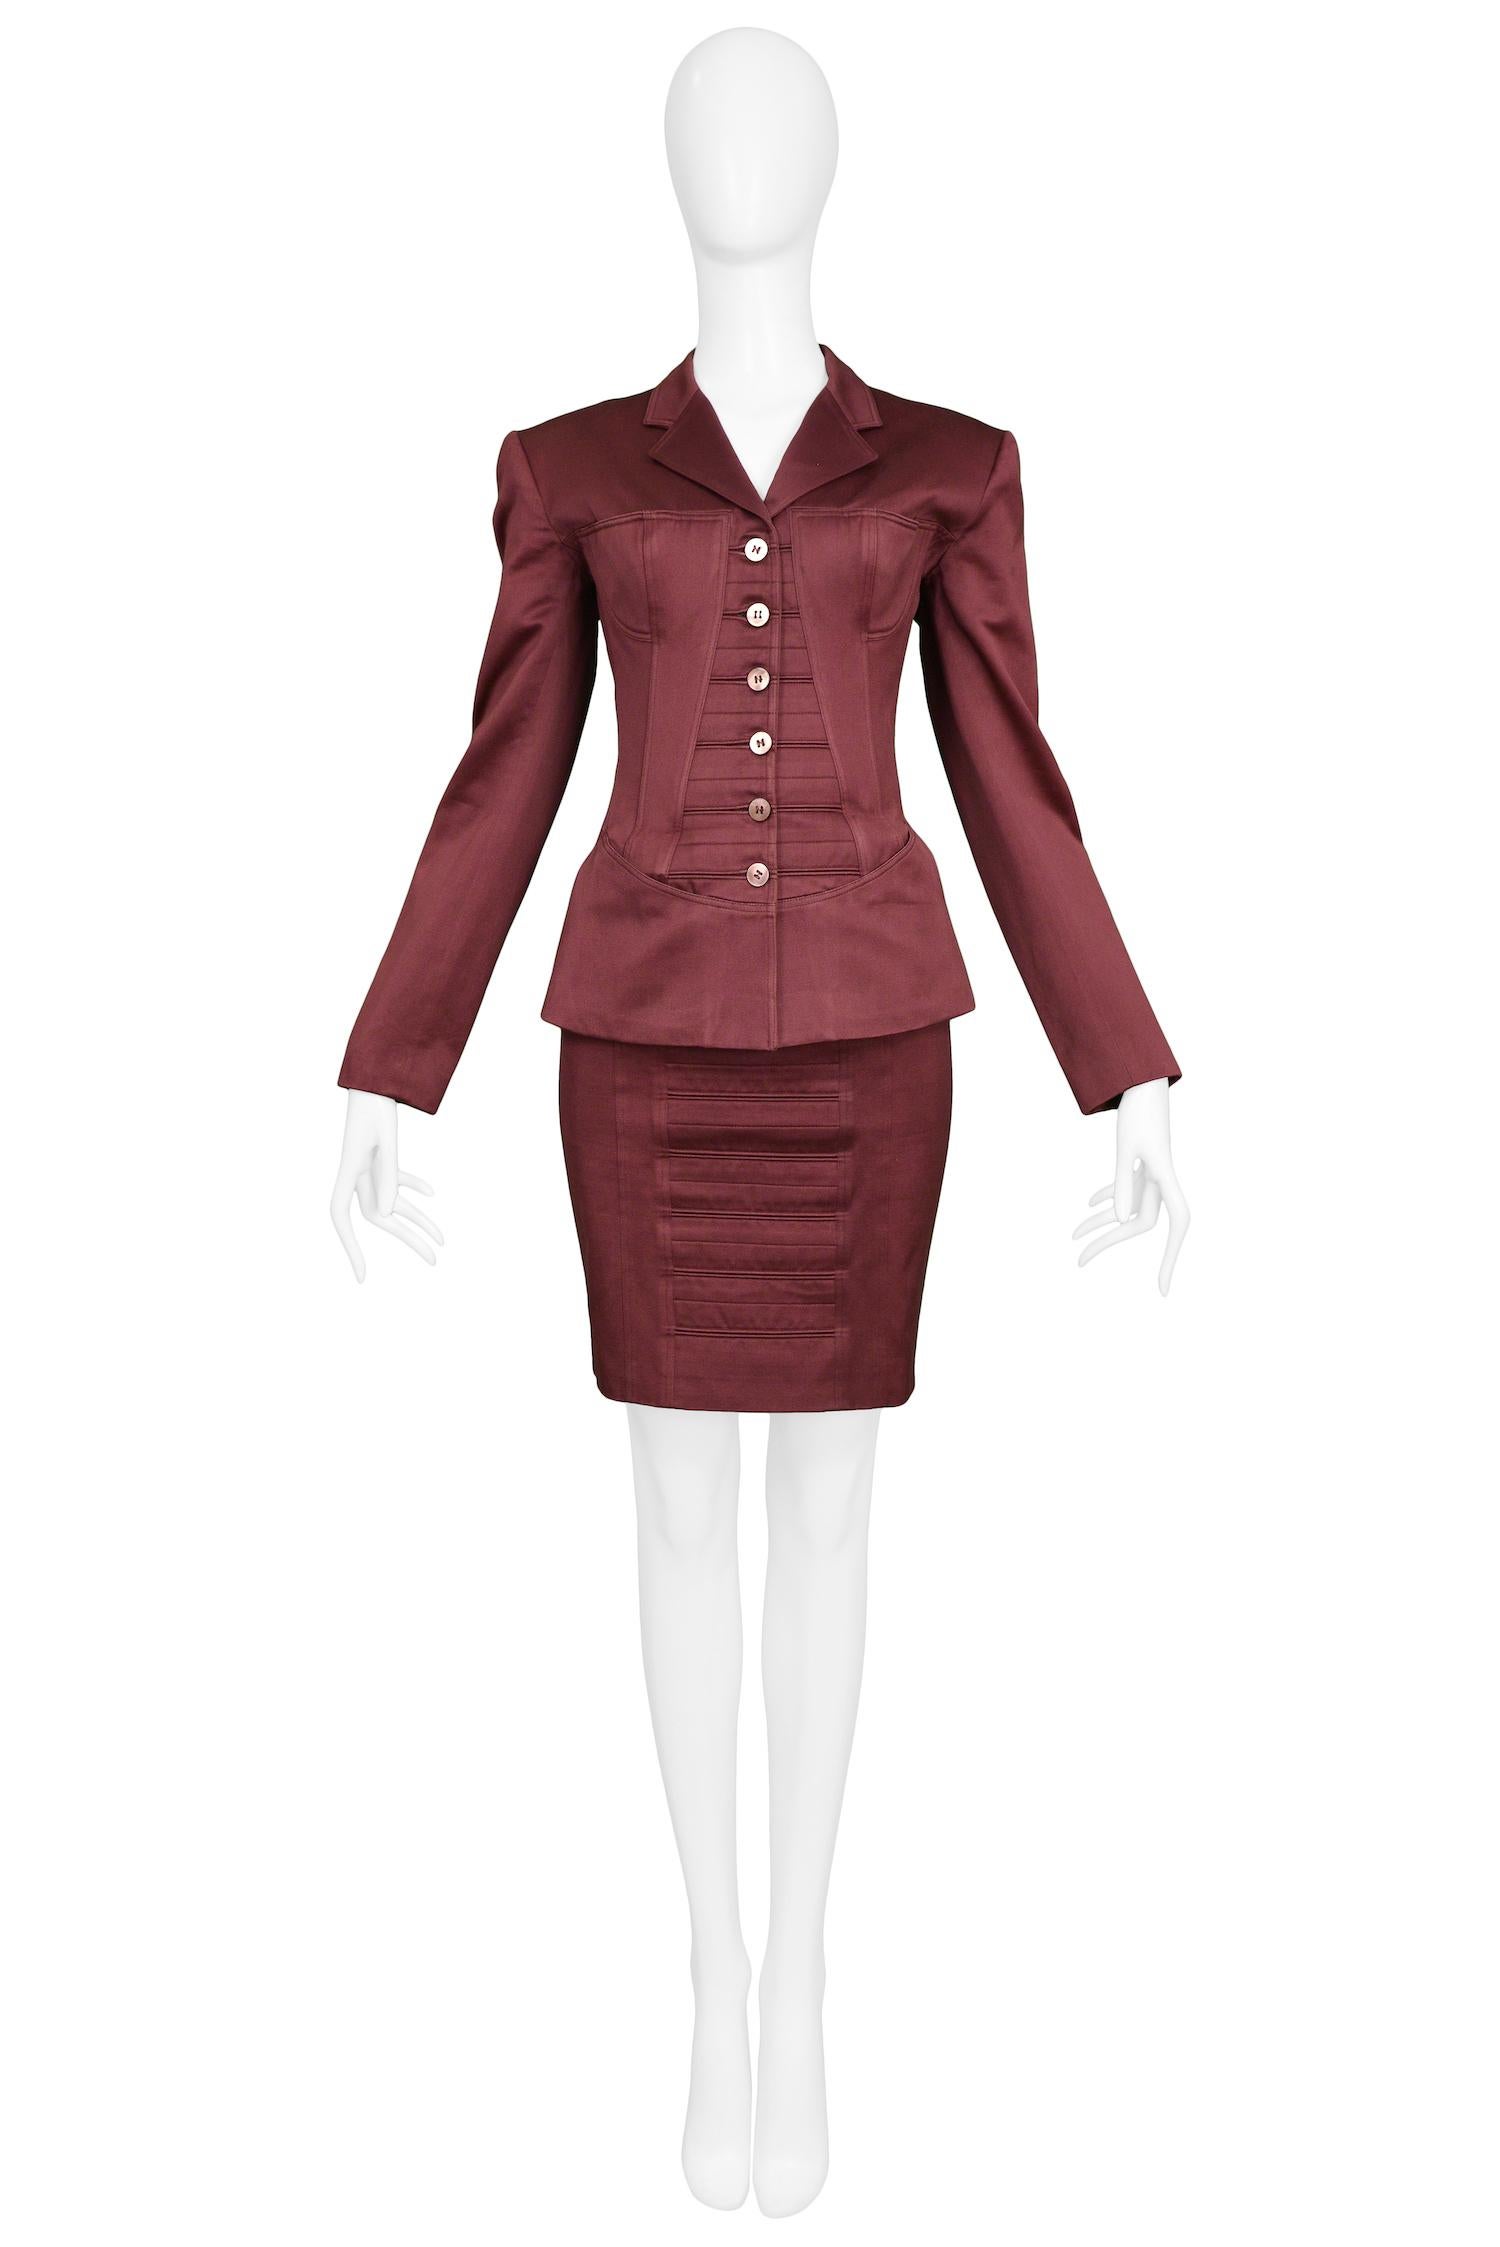 Vintage Azzedine Alaia burgundy corset skirt suit with bra detail and tonal buttons. From the Spring / Summer 1992 Collection. 

Excellent Condition.

Size 38
Jacket Measurements:
Shoulder 16.75